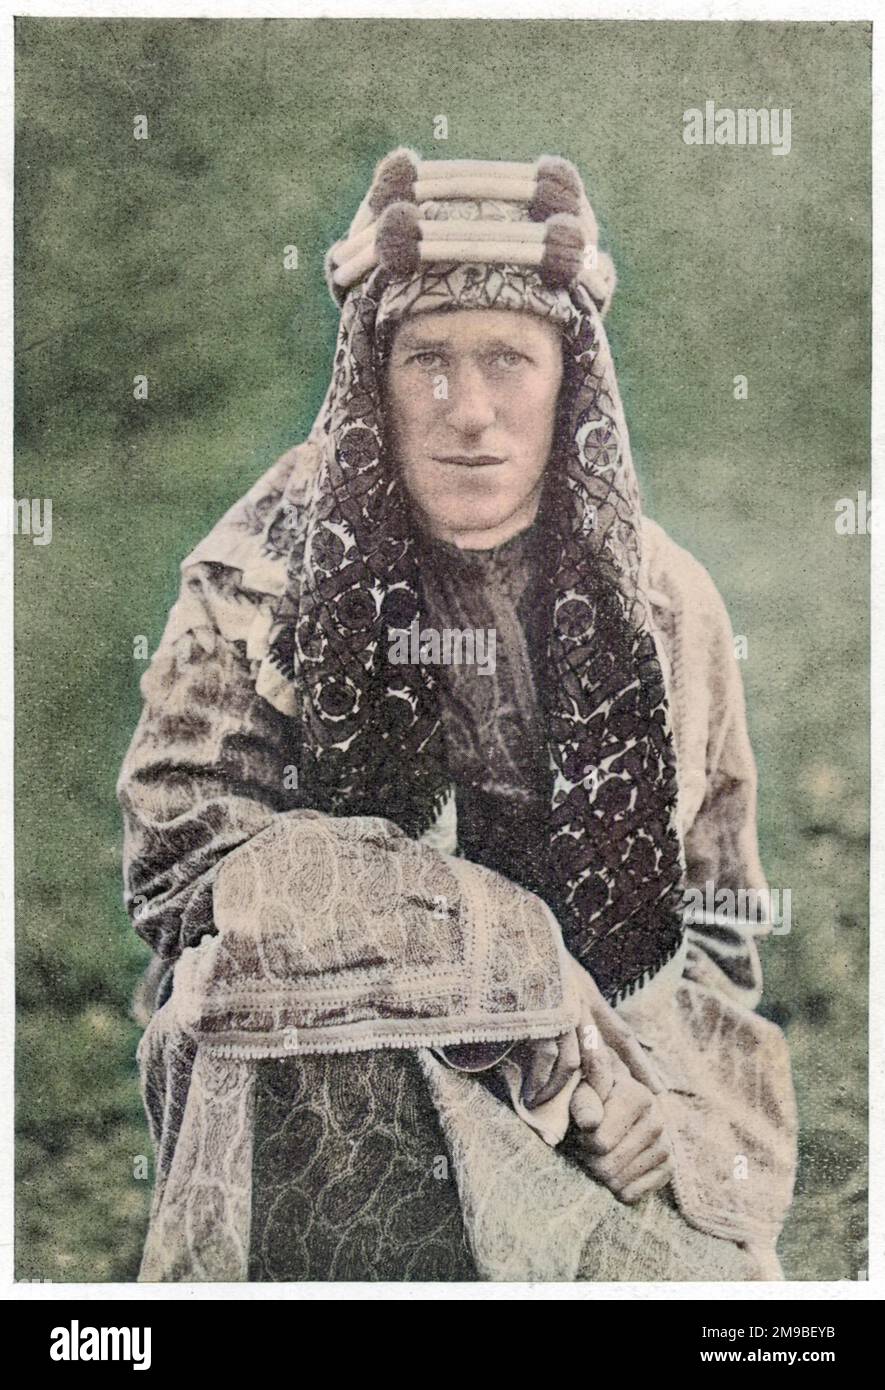 British archaeologist, soldier, intelligence officer and writer, Thomas Edward Lawrence (1888-1935), known as Lawrence of Arabia, in traditional Arab costume. Stock Photo